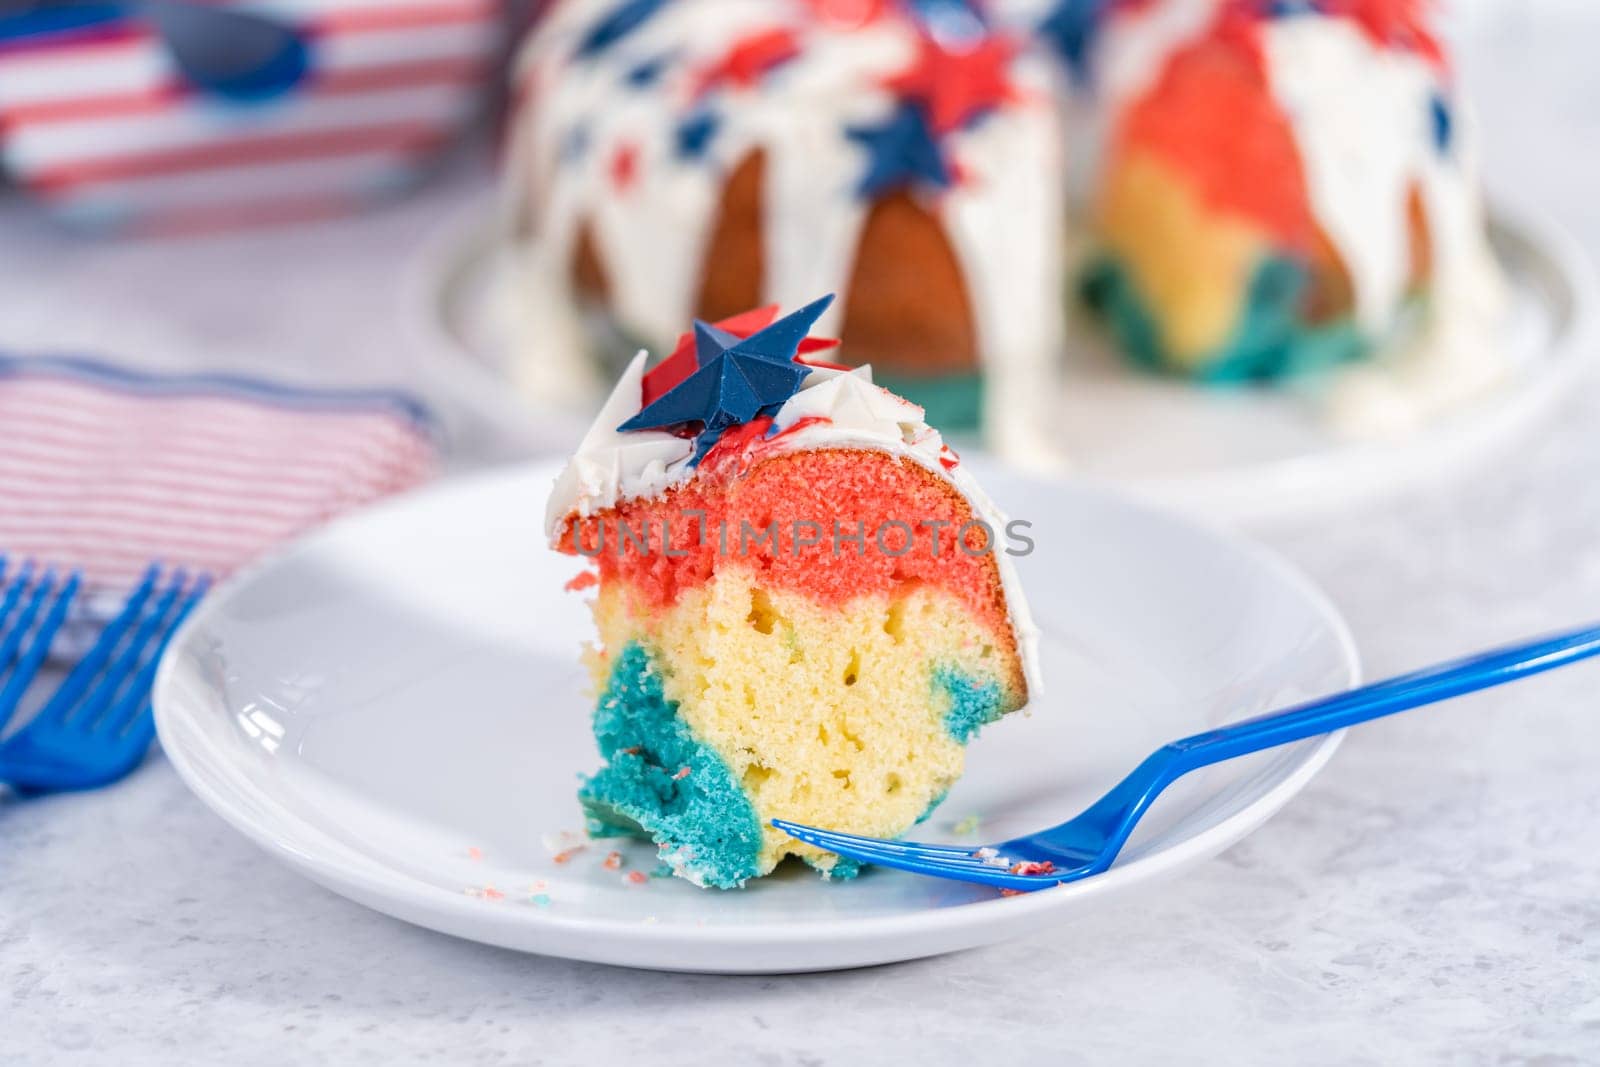 Slice of July 4th bundt cake covered with a vanilla glaze and decorated with chocolate stars.